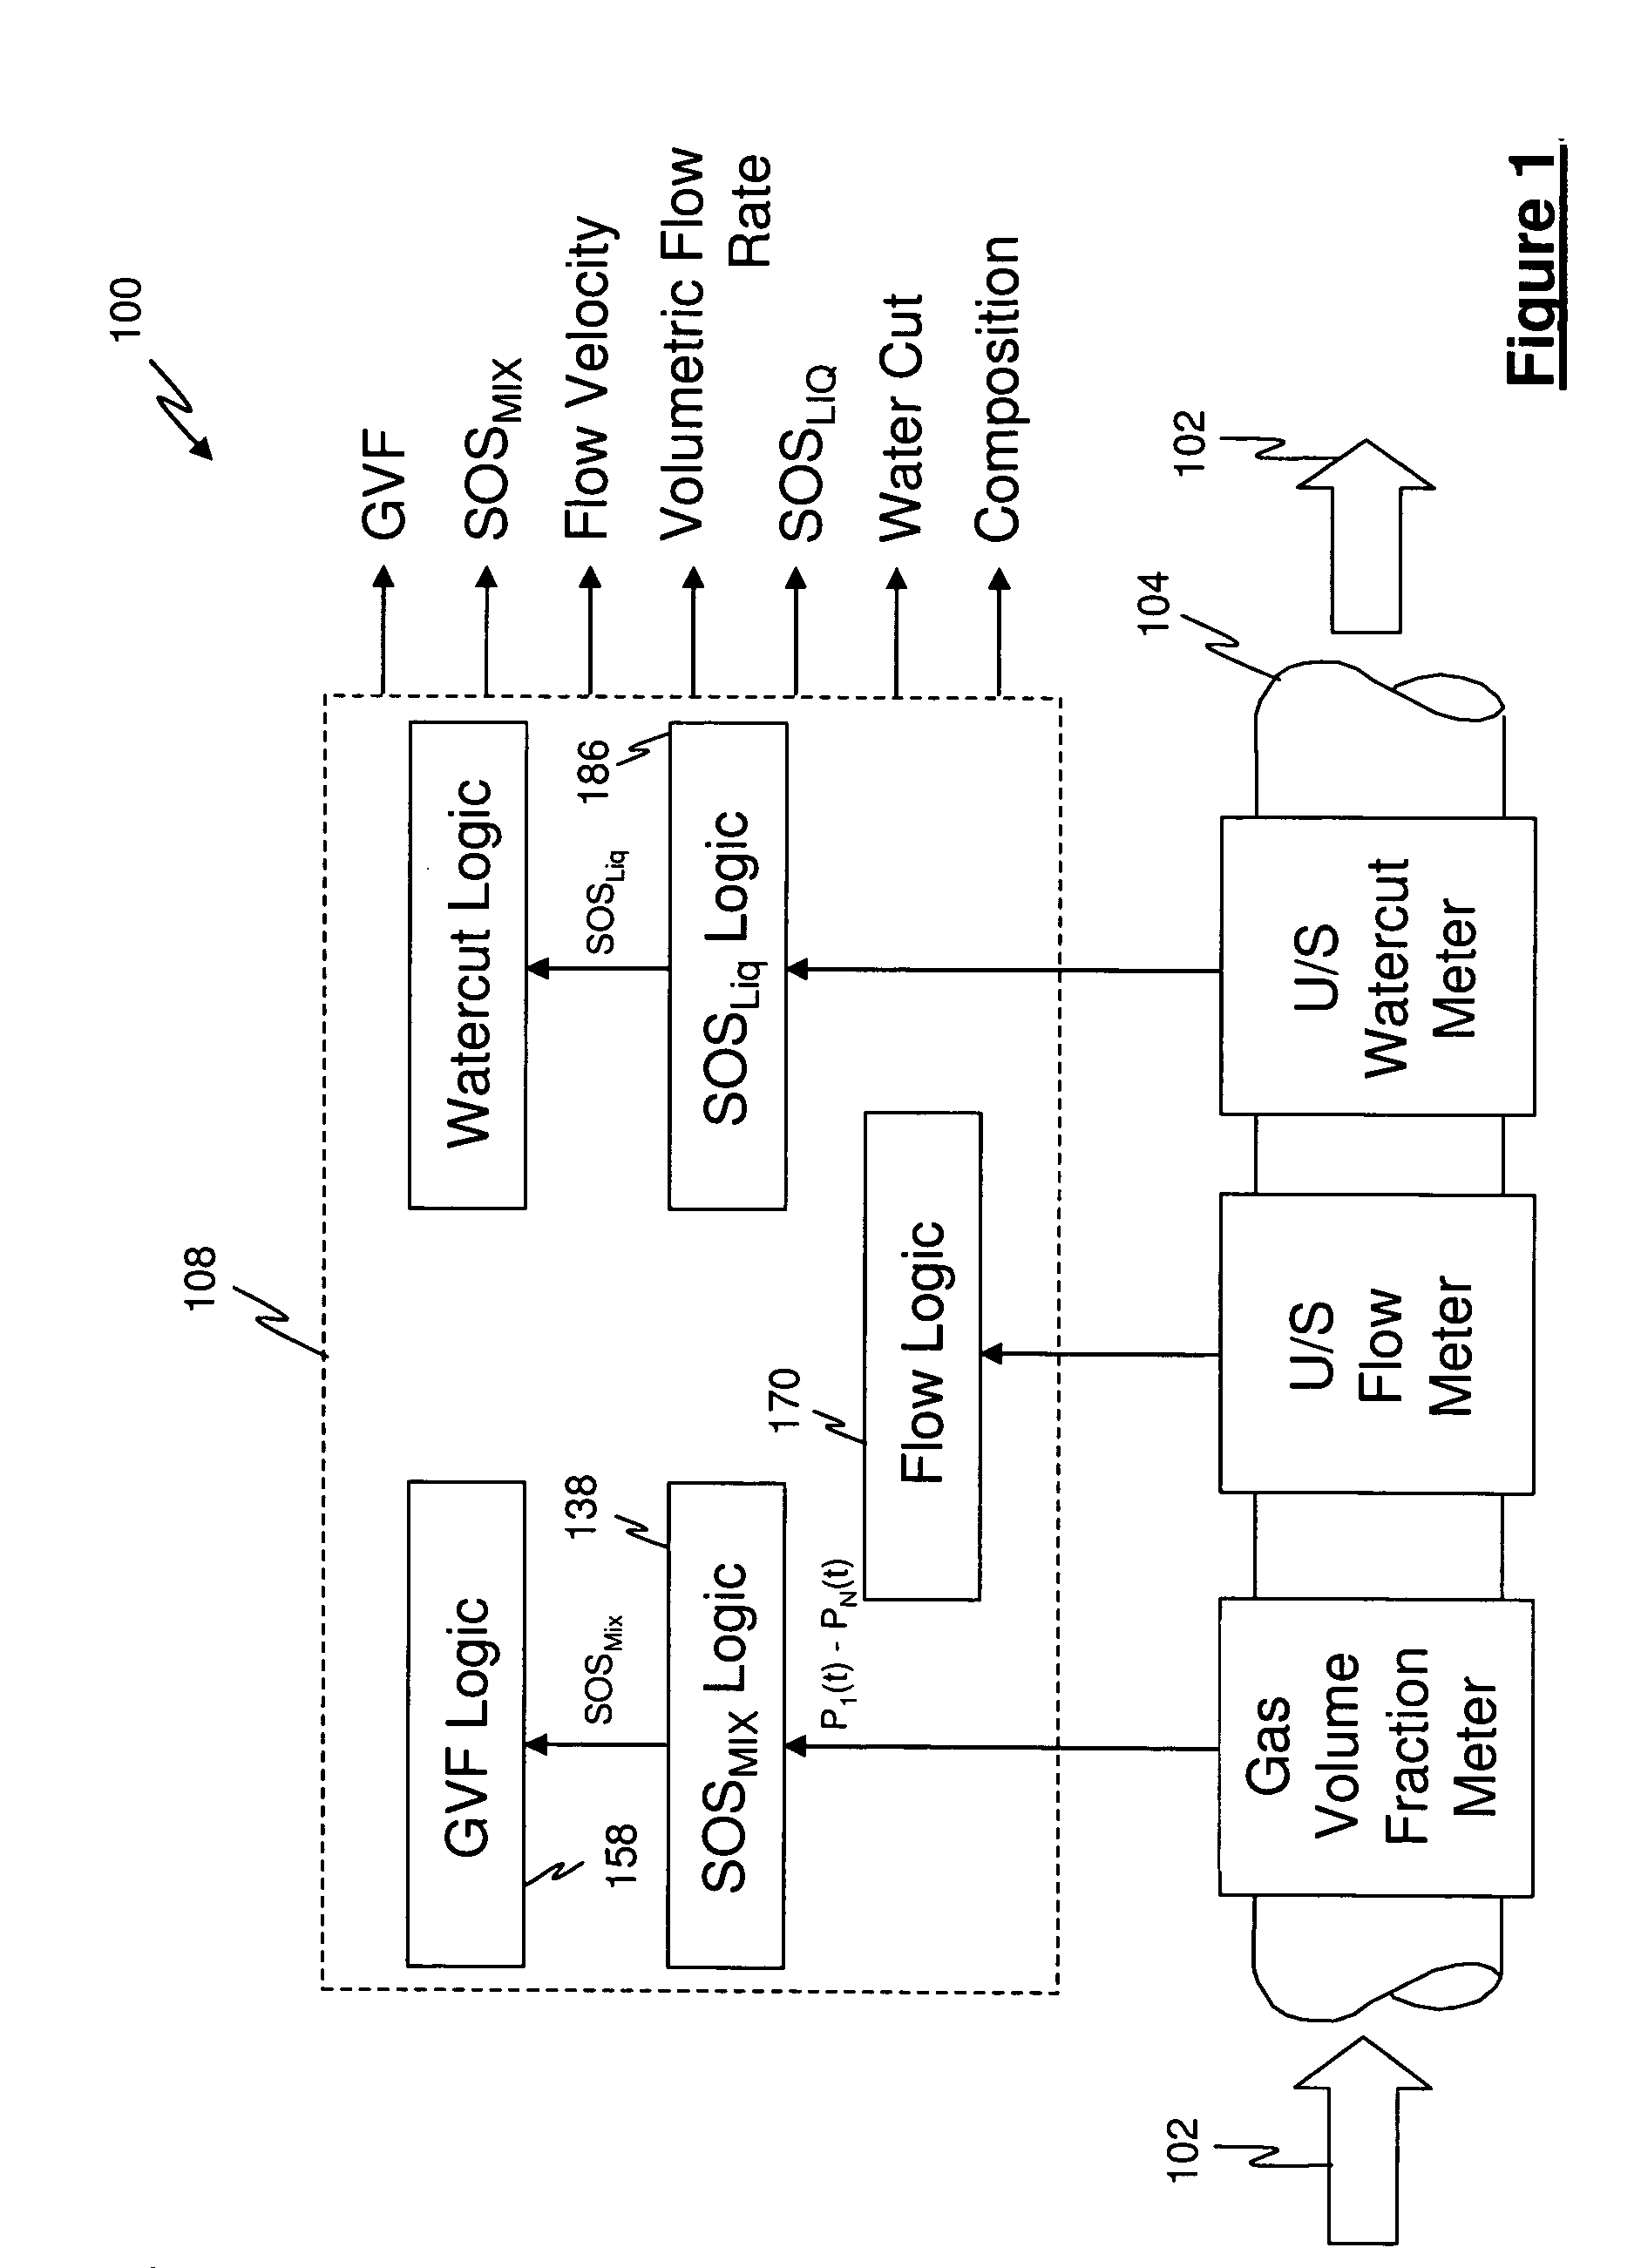 Apparatus and method for measuring a parameter of a multiphase flow